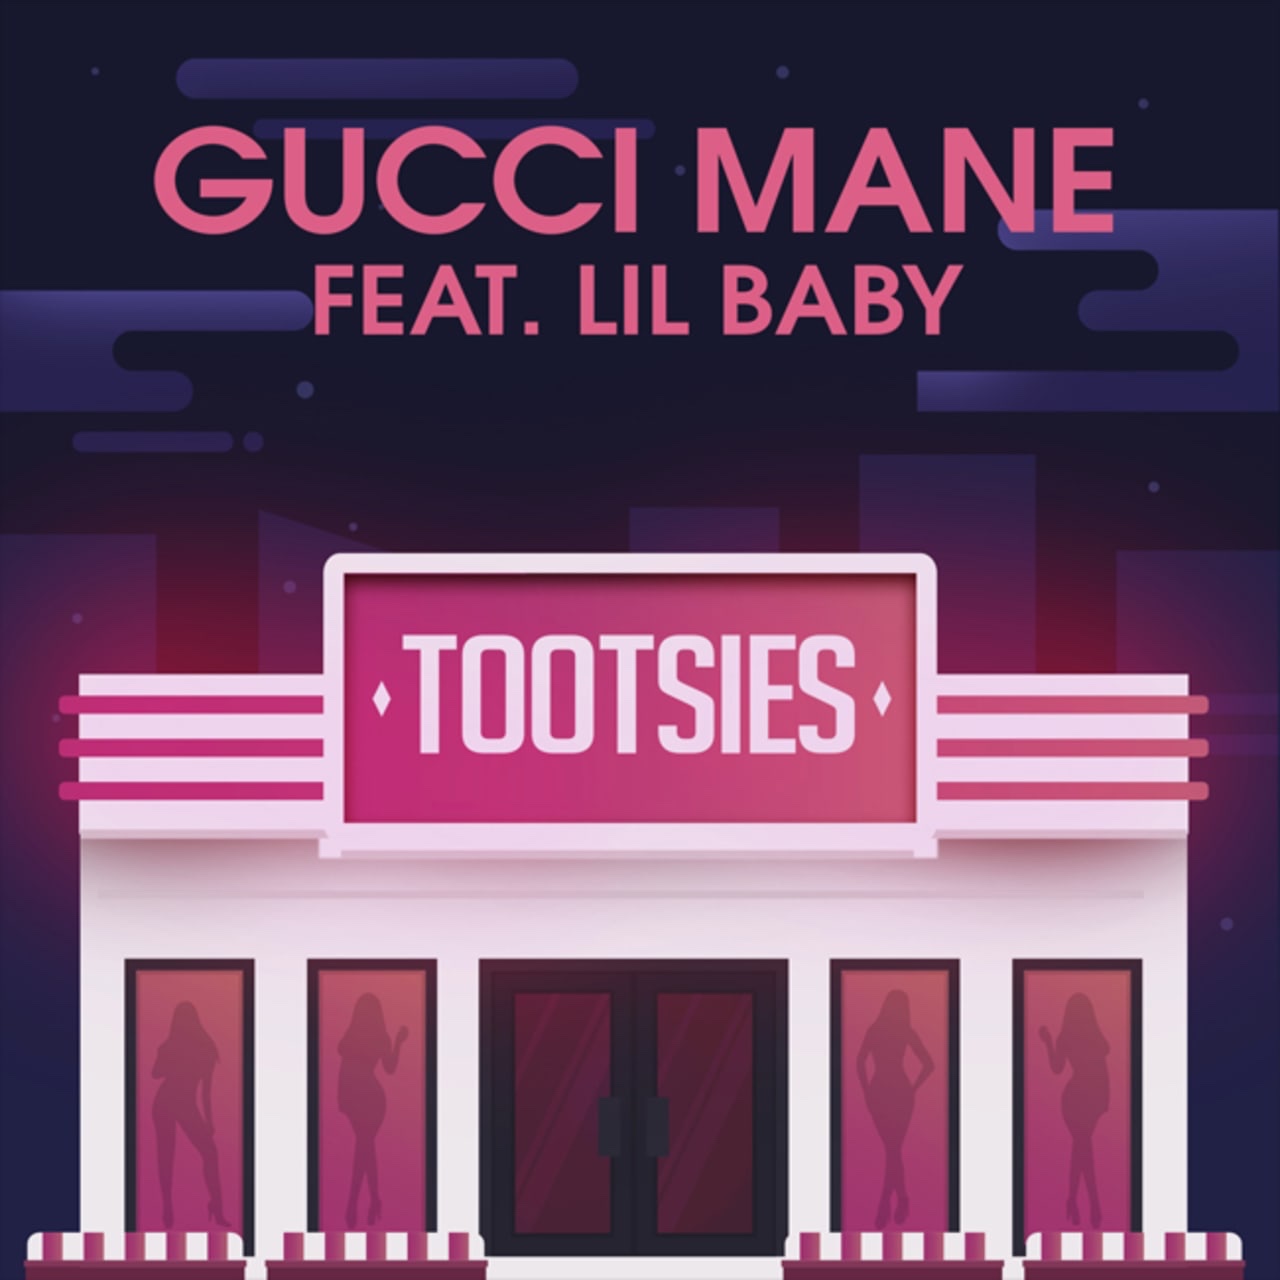 Gucci Mane Calls On Lil Baby For “Tootsies”